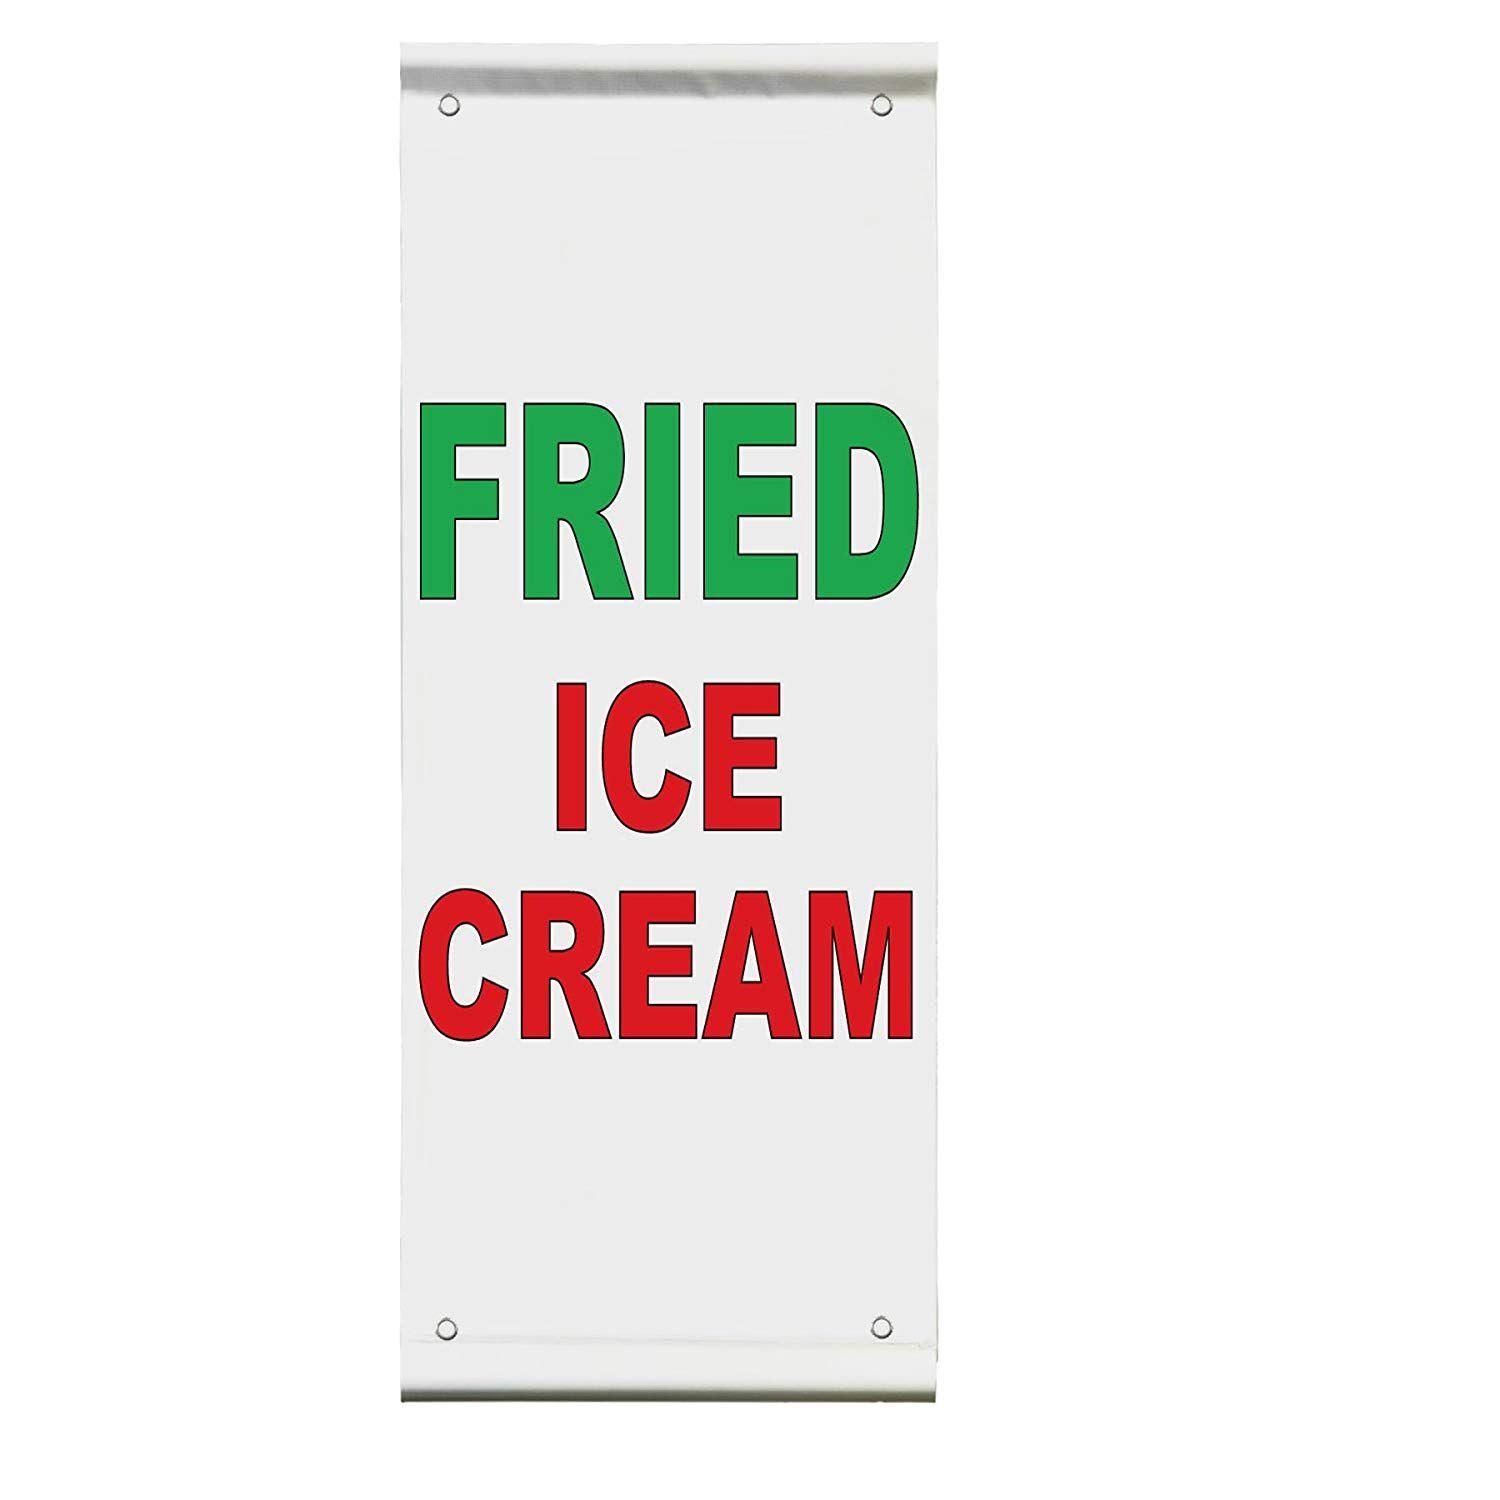 Red and Green Banner Restaurant Logo - Amazon.com : Fried Ice Cream Green Red Bar Restaurant Double Sided